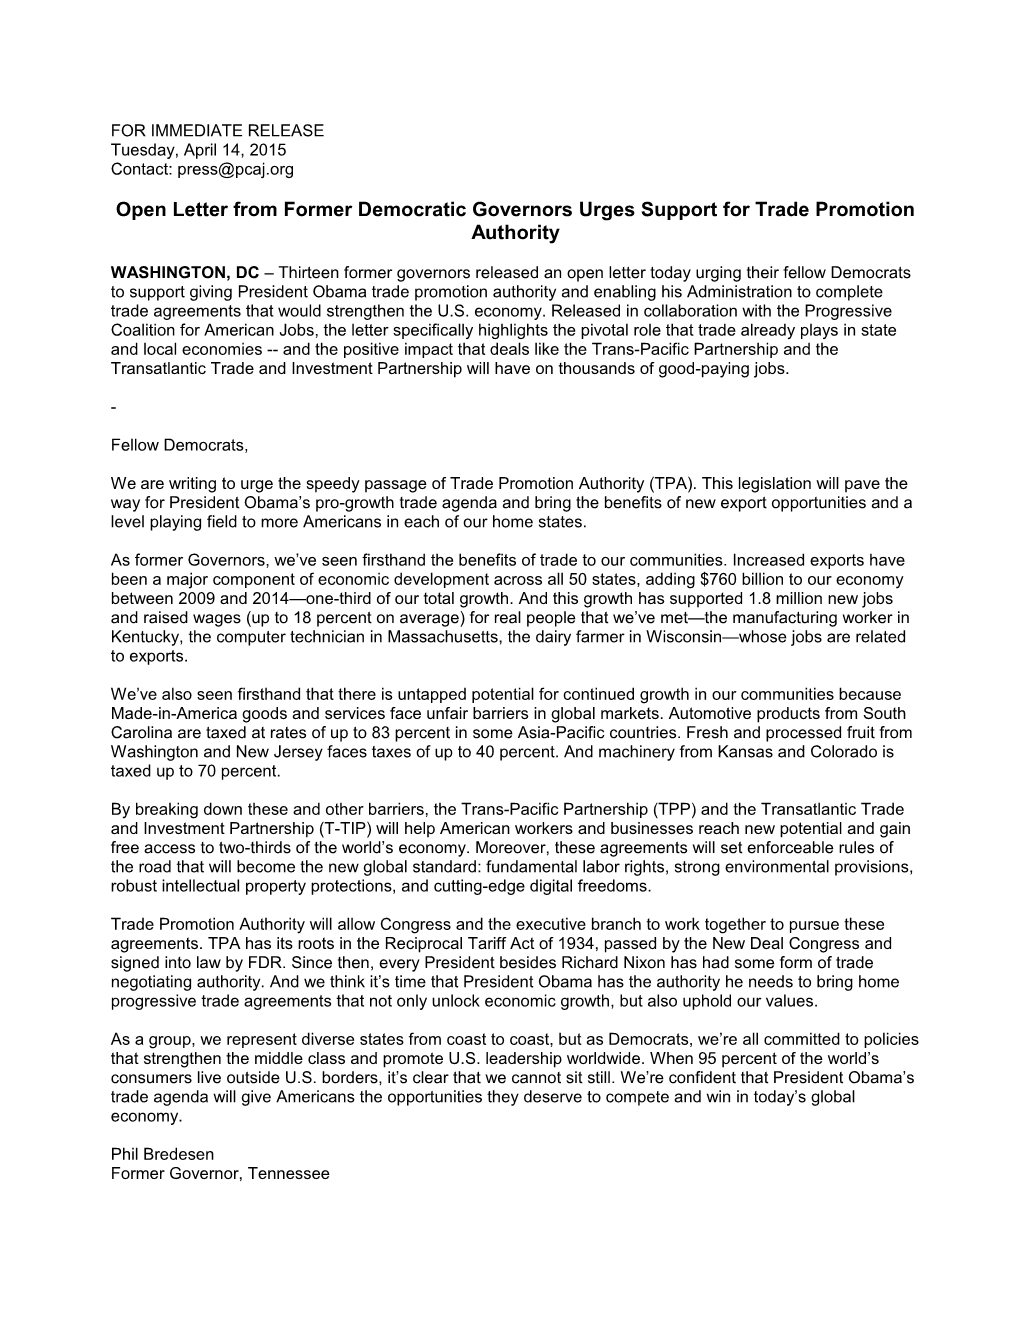 Open Letter from Former Democratic Governors Urges Support for Trade Promotion Authority